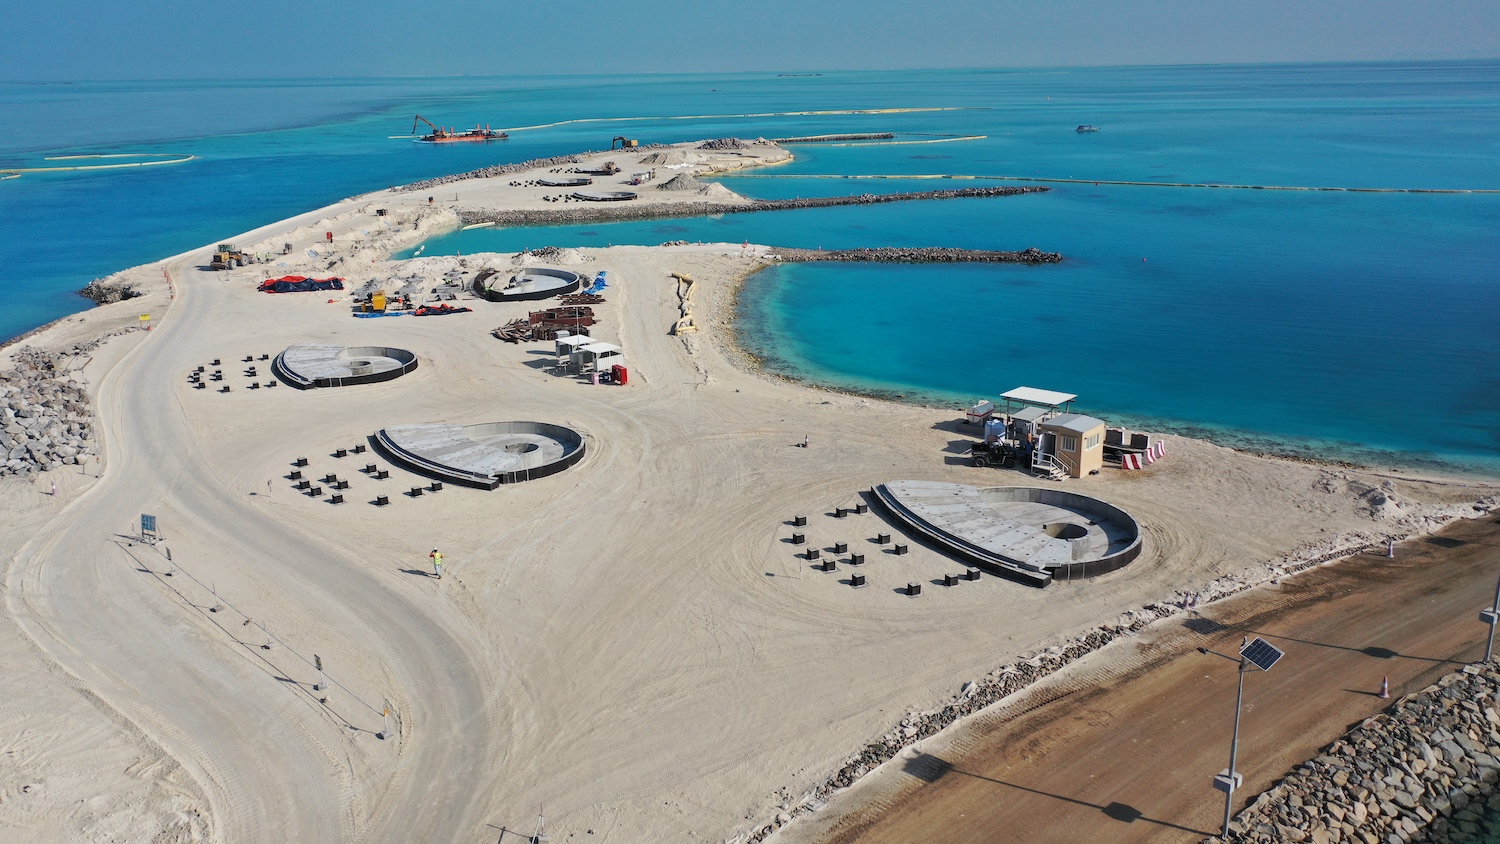 The Red Sea Development Company appoints Mammoet for transport and installation of Sheybarah Island Resort’s villas